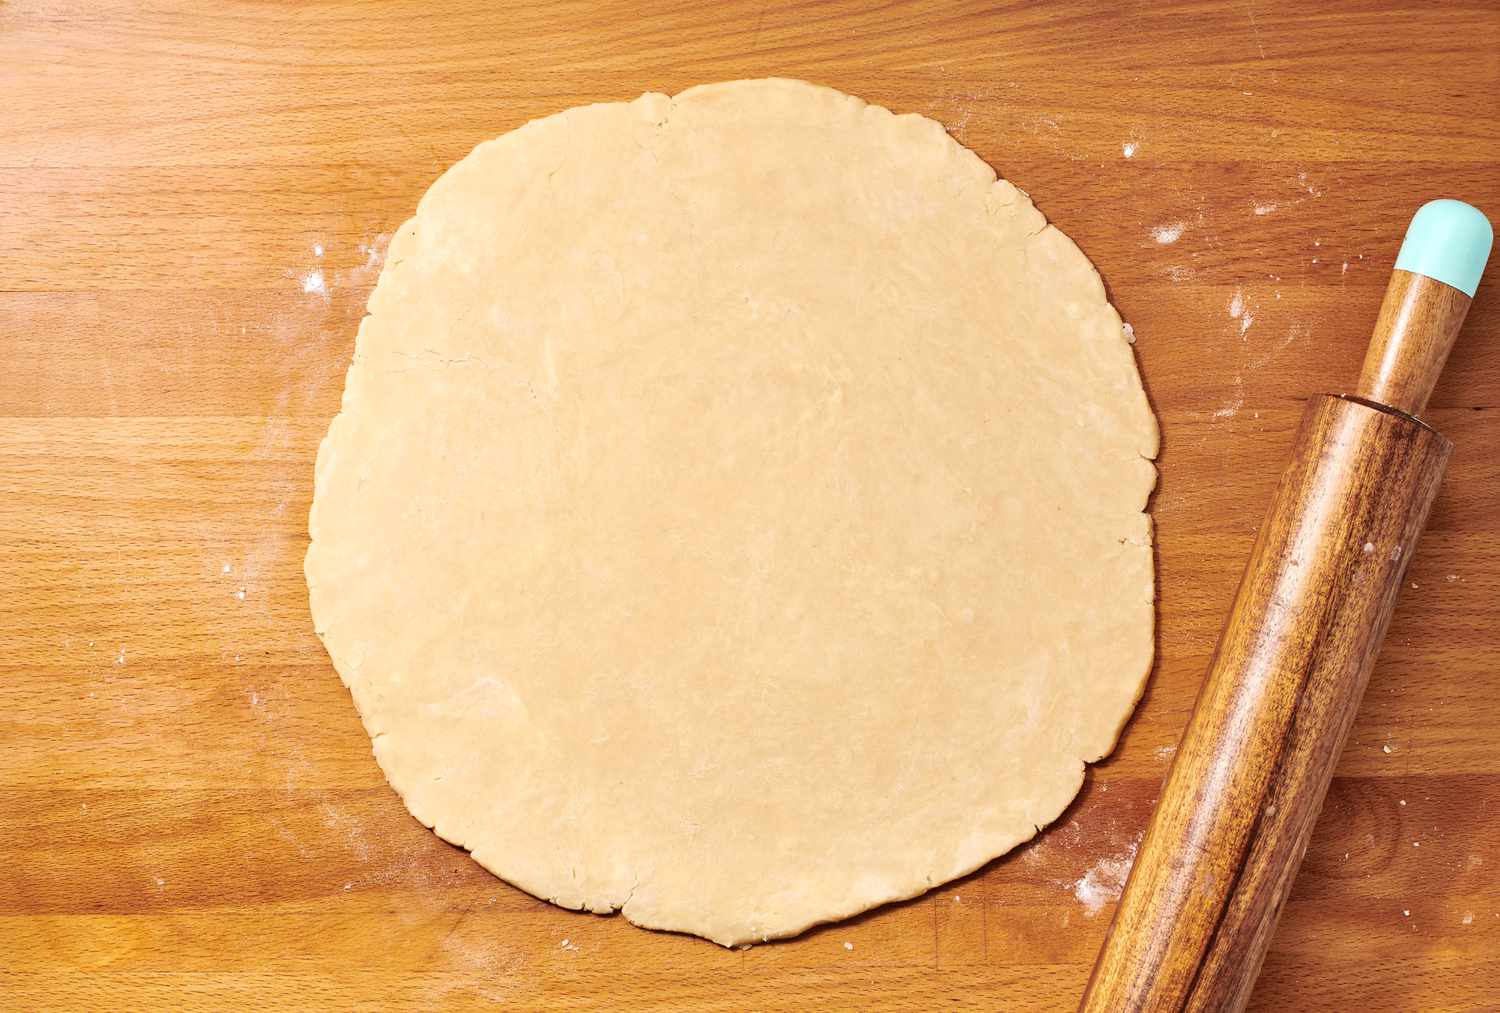 A large, flat round piece of dough on a floured surface with a rolling pin